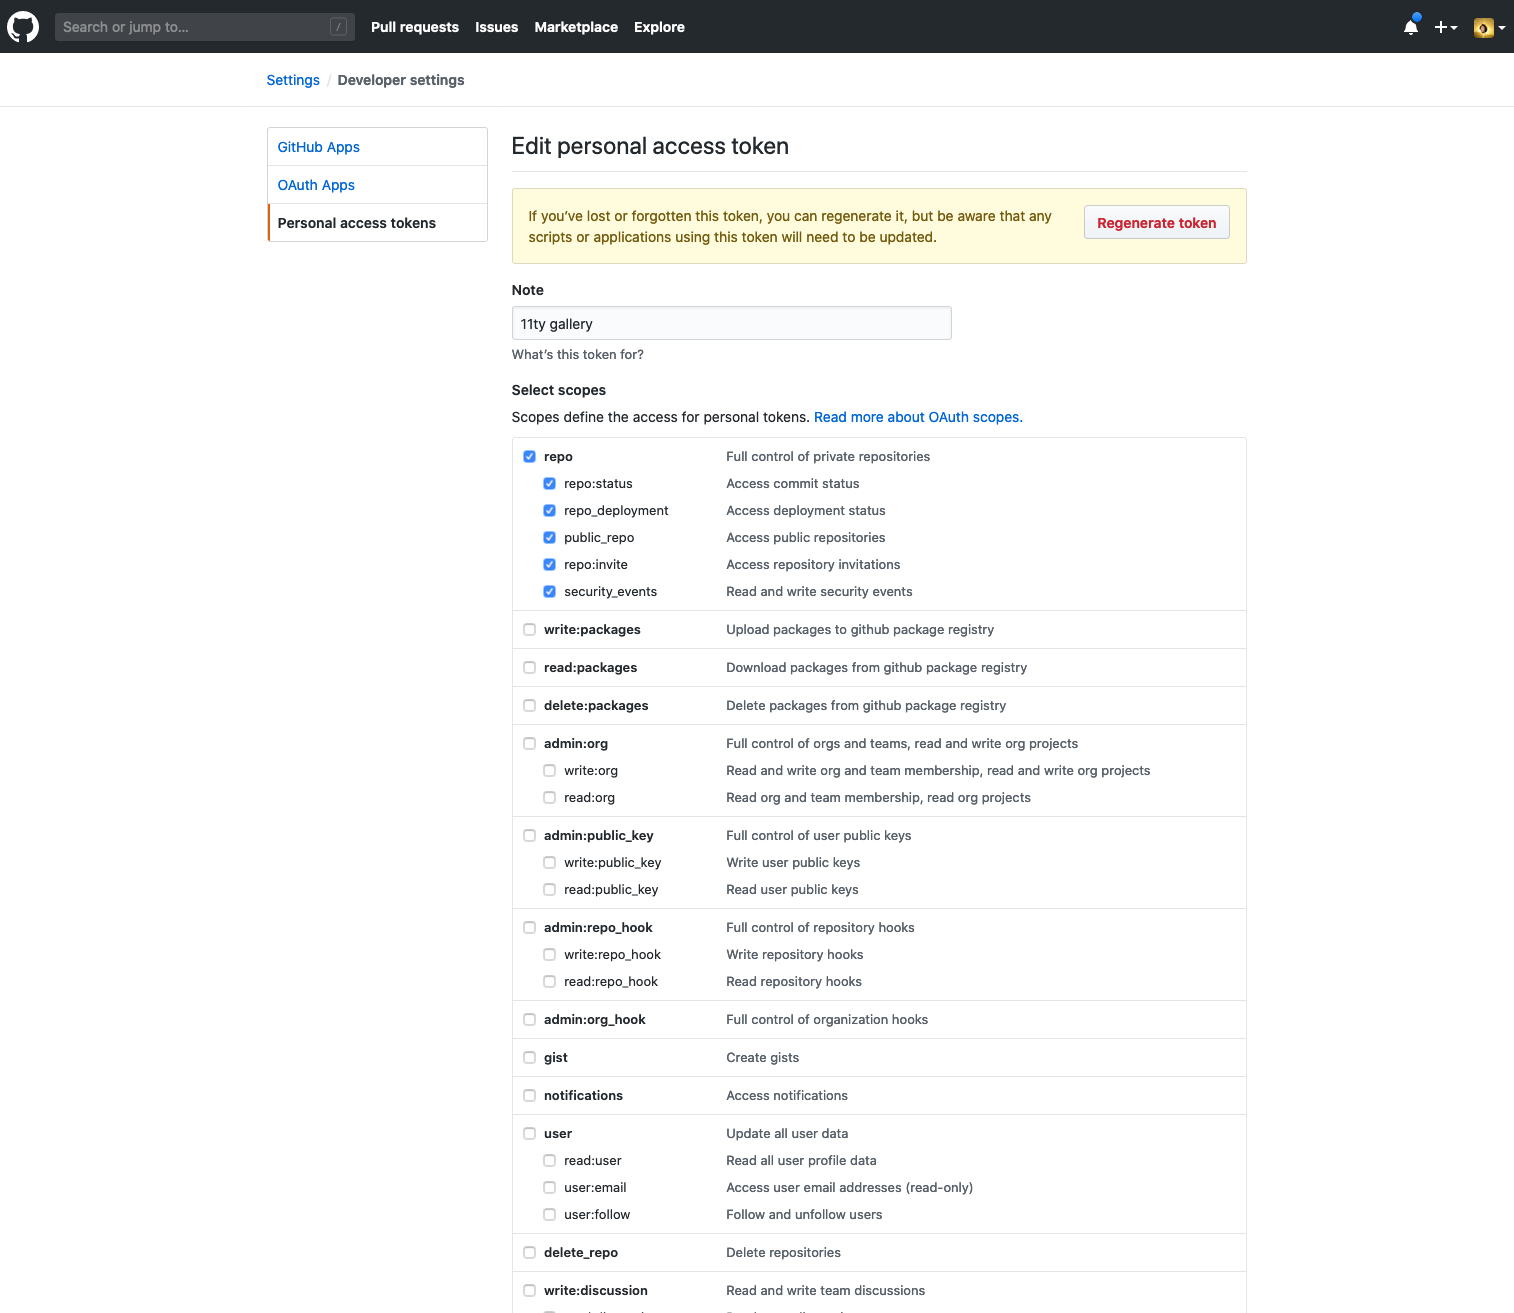 Head over to your GitHub Developer settings to create a new personal access token and give it the repo scope. You’ll use this token to authenticate when you hit the dispatch endpoint. 